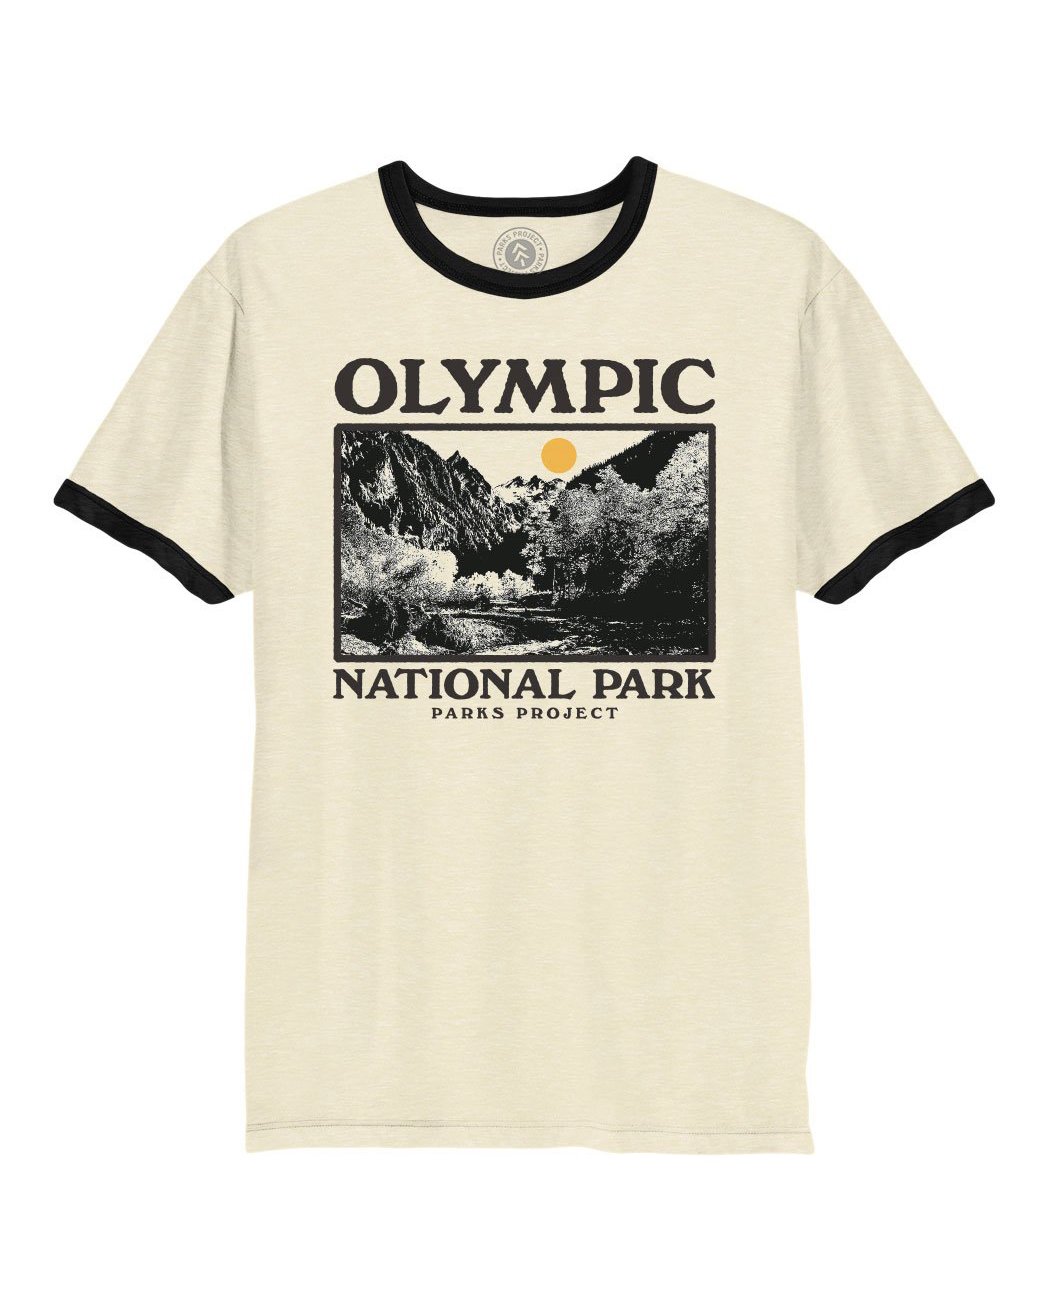 Holiday Gift Guide for National Park Lovers - Olympic TShirt